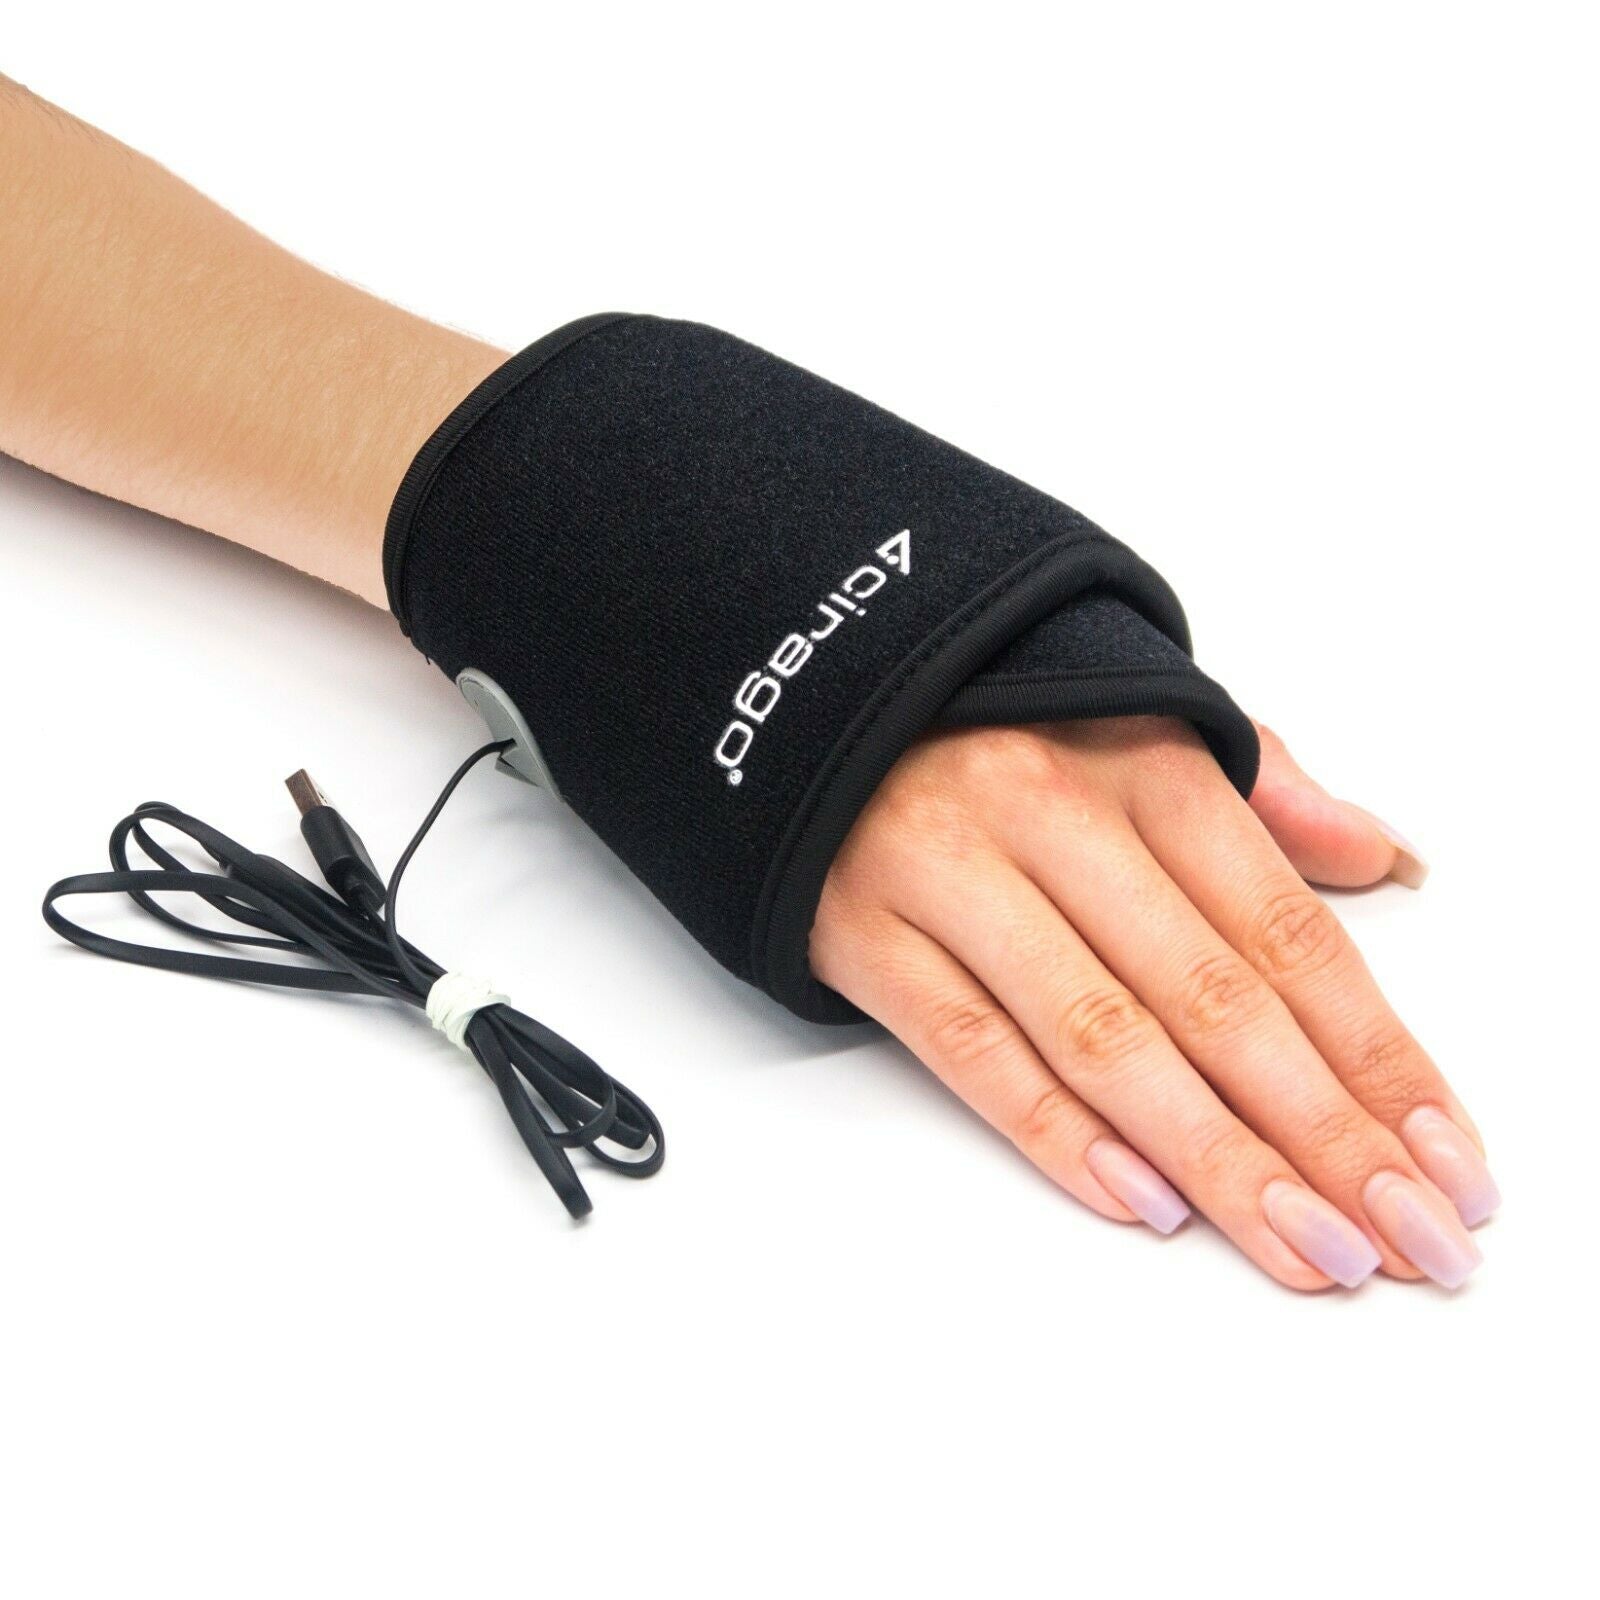 Ciargo Graphene Far Infrared Wrist Wrap Heating Pad for Pain Relief, 3 Modes